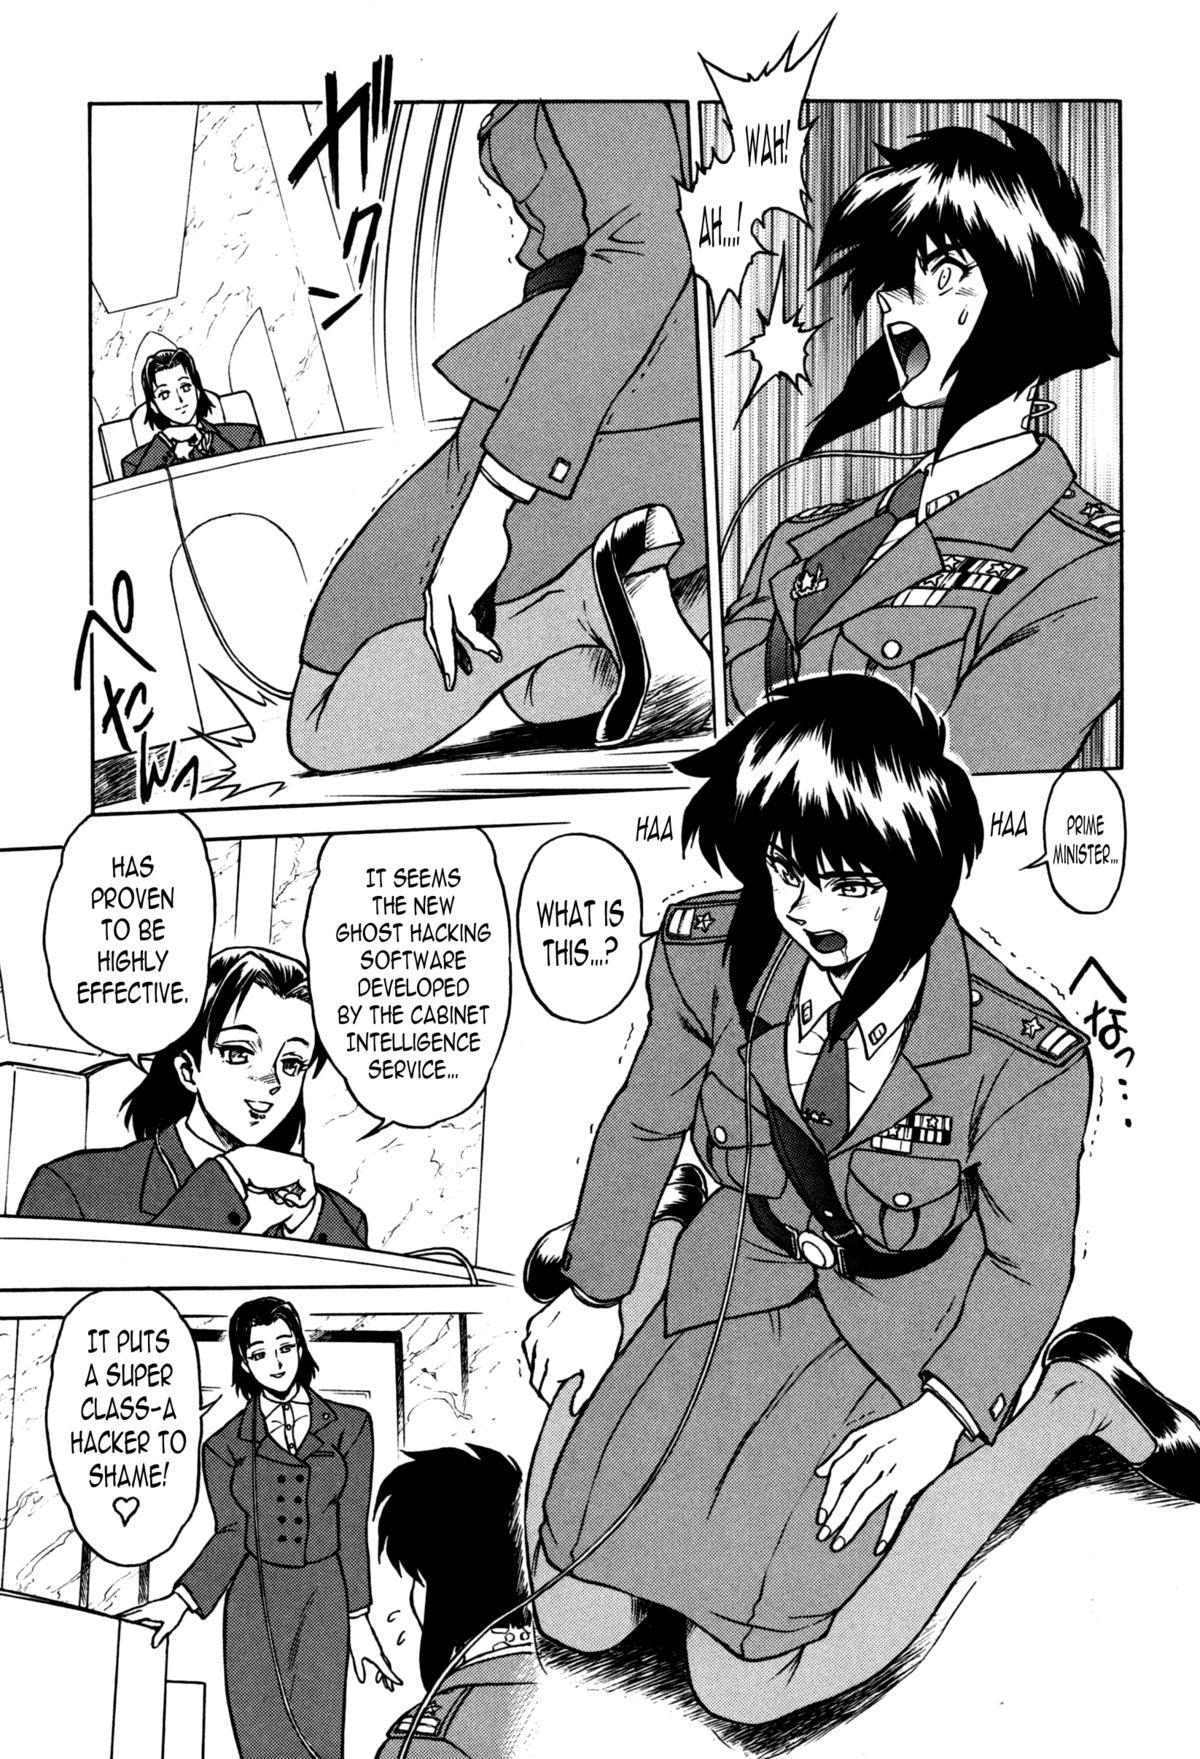 Girls Getting Fucked Koukaku G.I.S & S.A.C Hon 4 - Ghost in the shell Kashima - Page 6